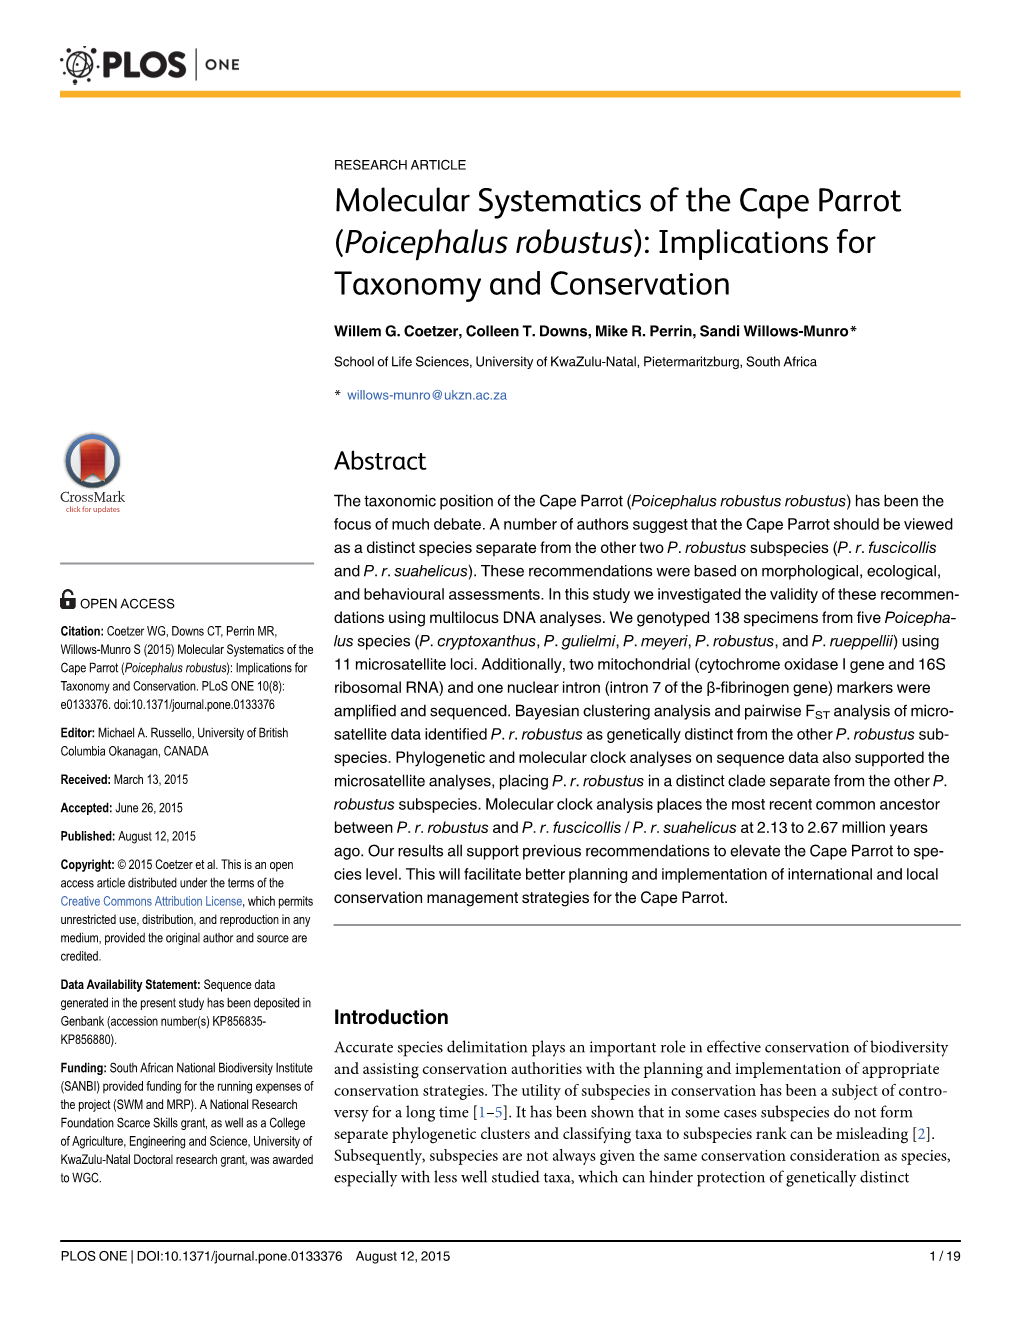 Molecular Systematics of the Cape Parrot (Poicephalus Robustus): Implications for Taxonomy and Conservation